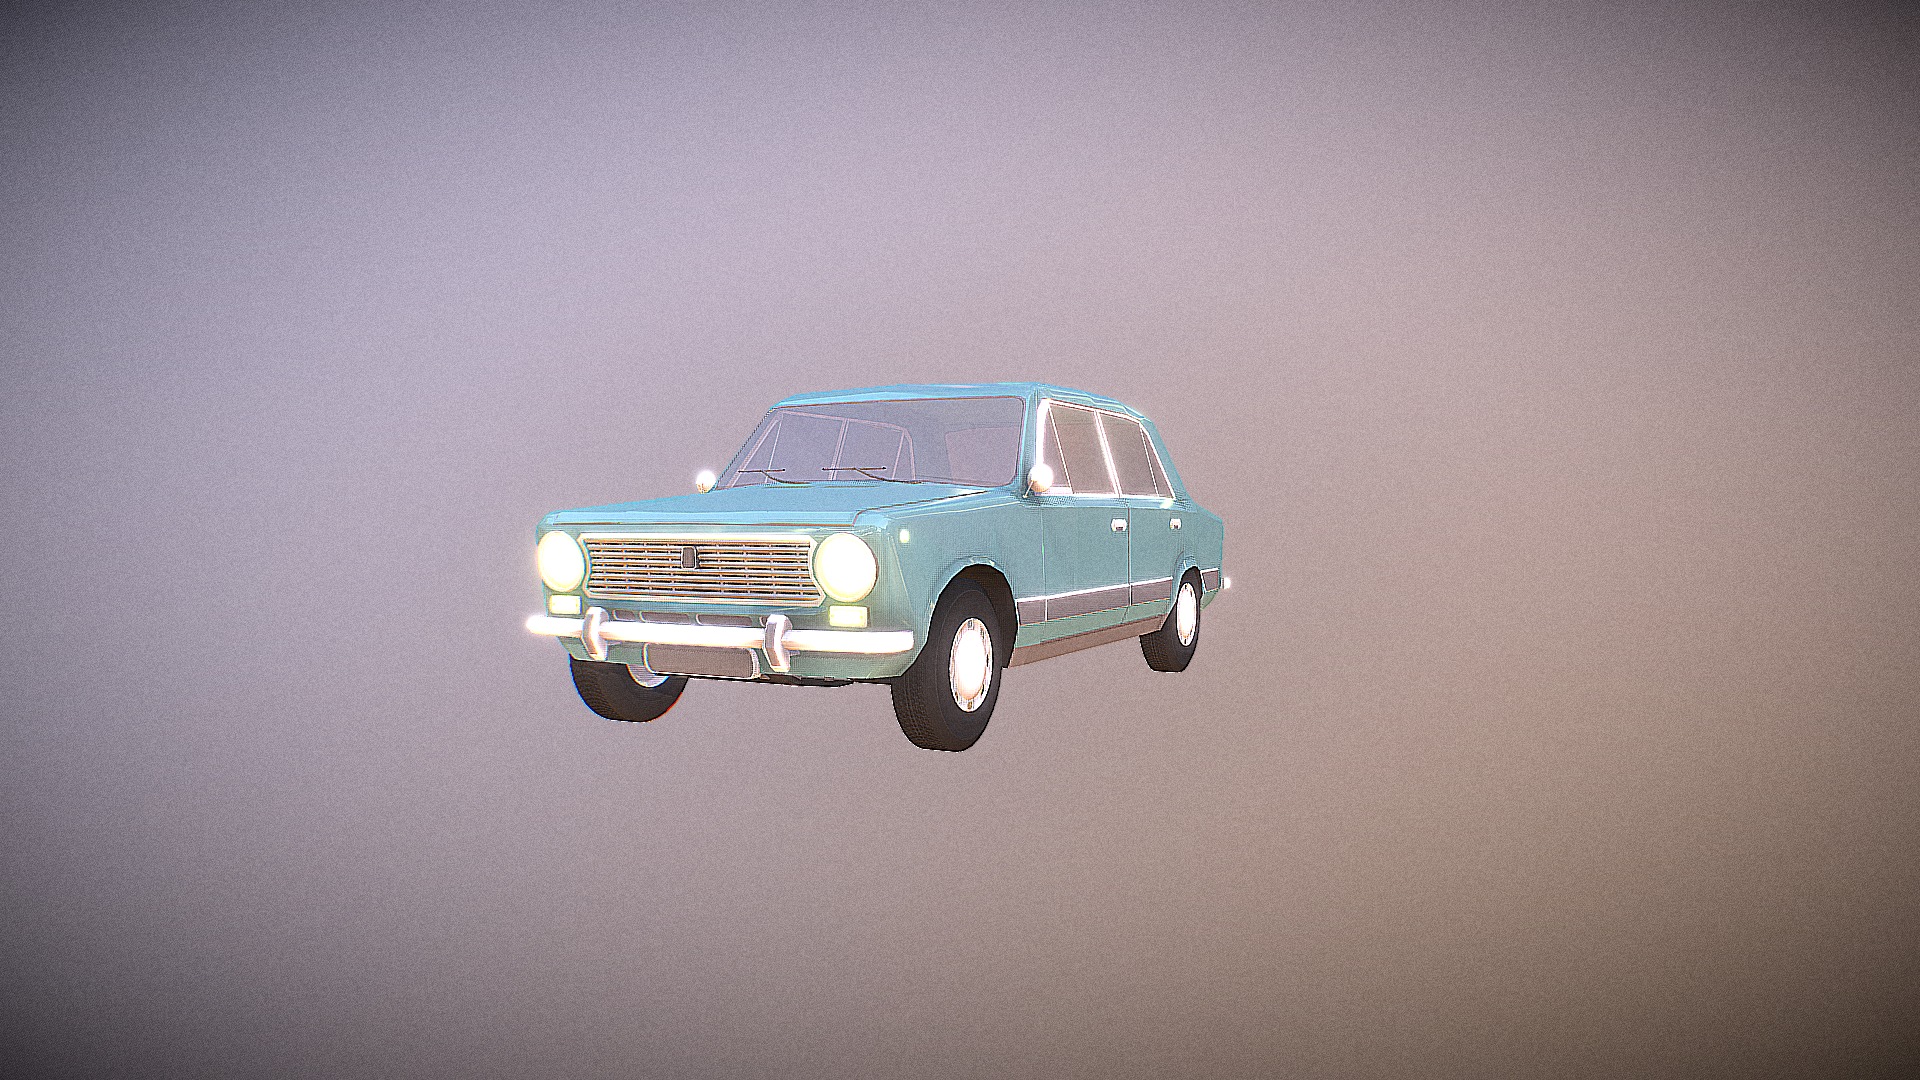 3D model LADA 2101 (VAZ)  1970-1988 - This is a 3D model of the LADA 2101 (VAZ)  1970-1988. The 3D model is about a toy car on a surface.